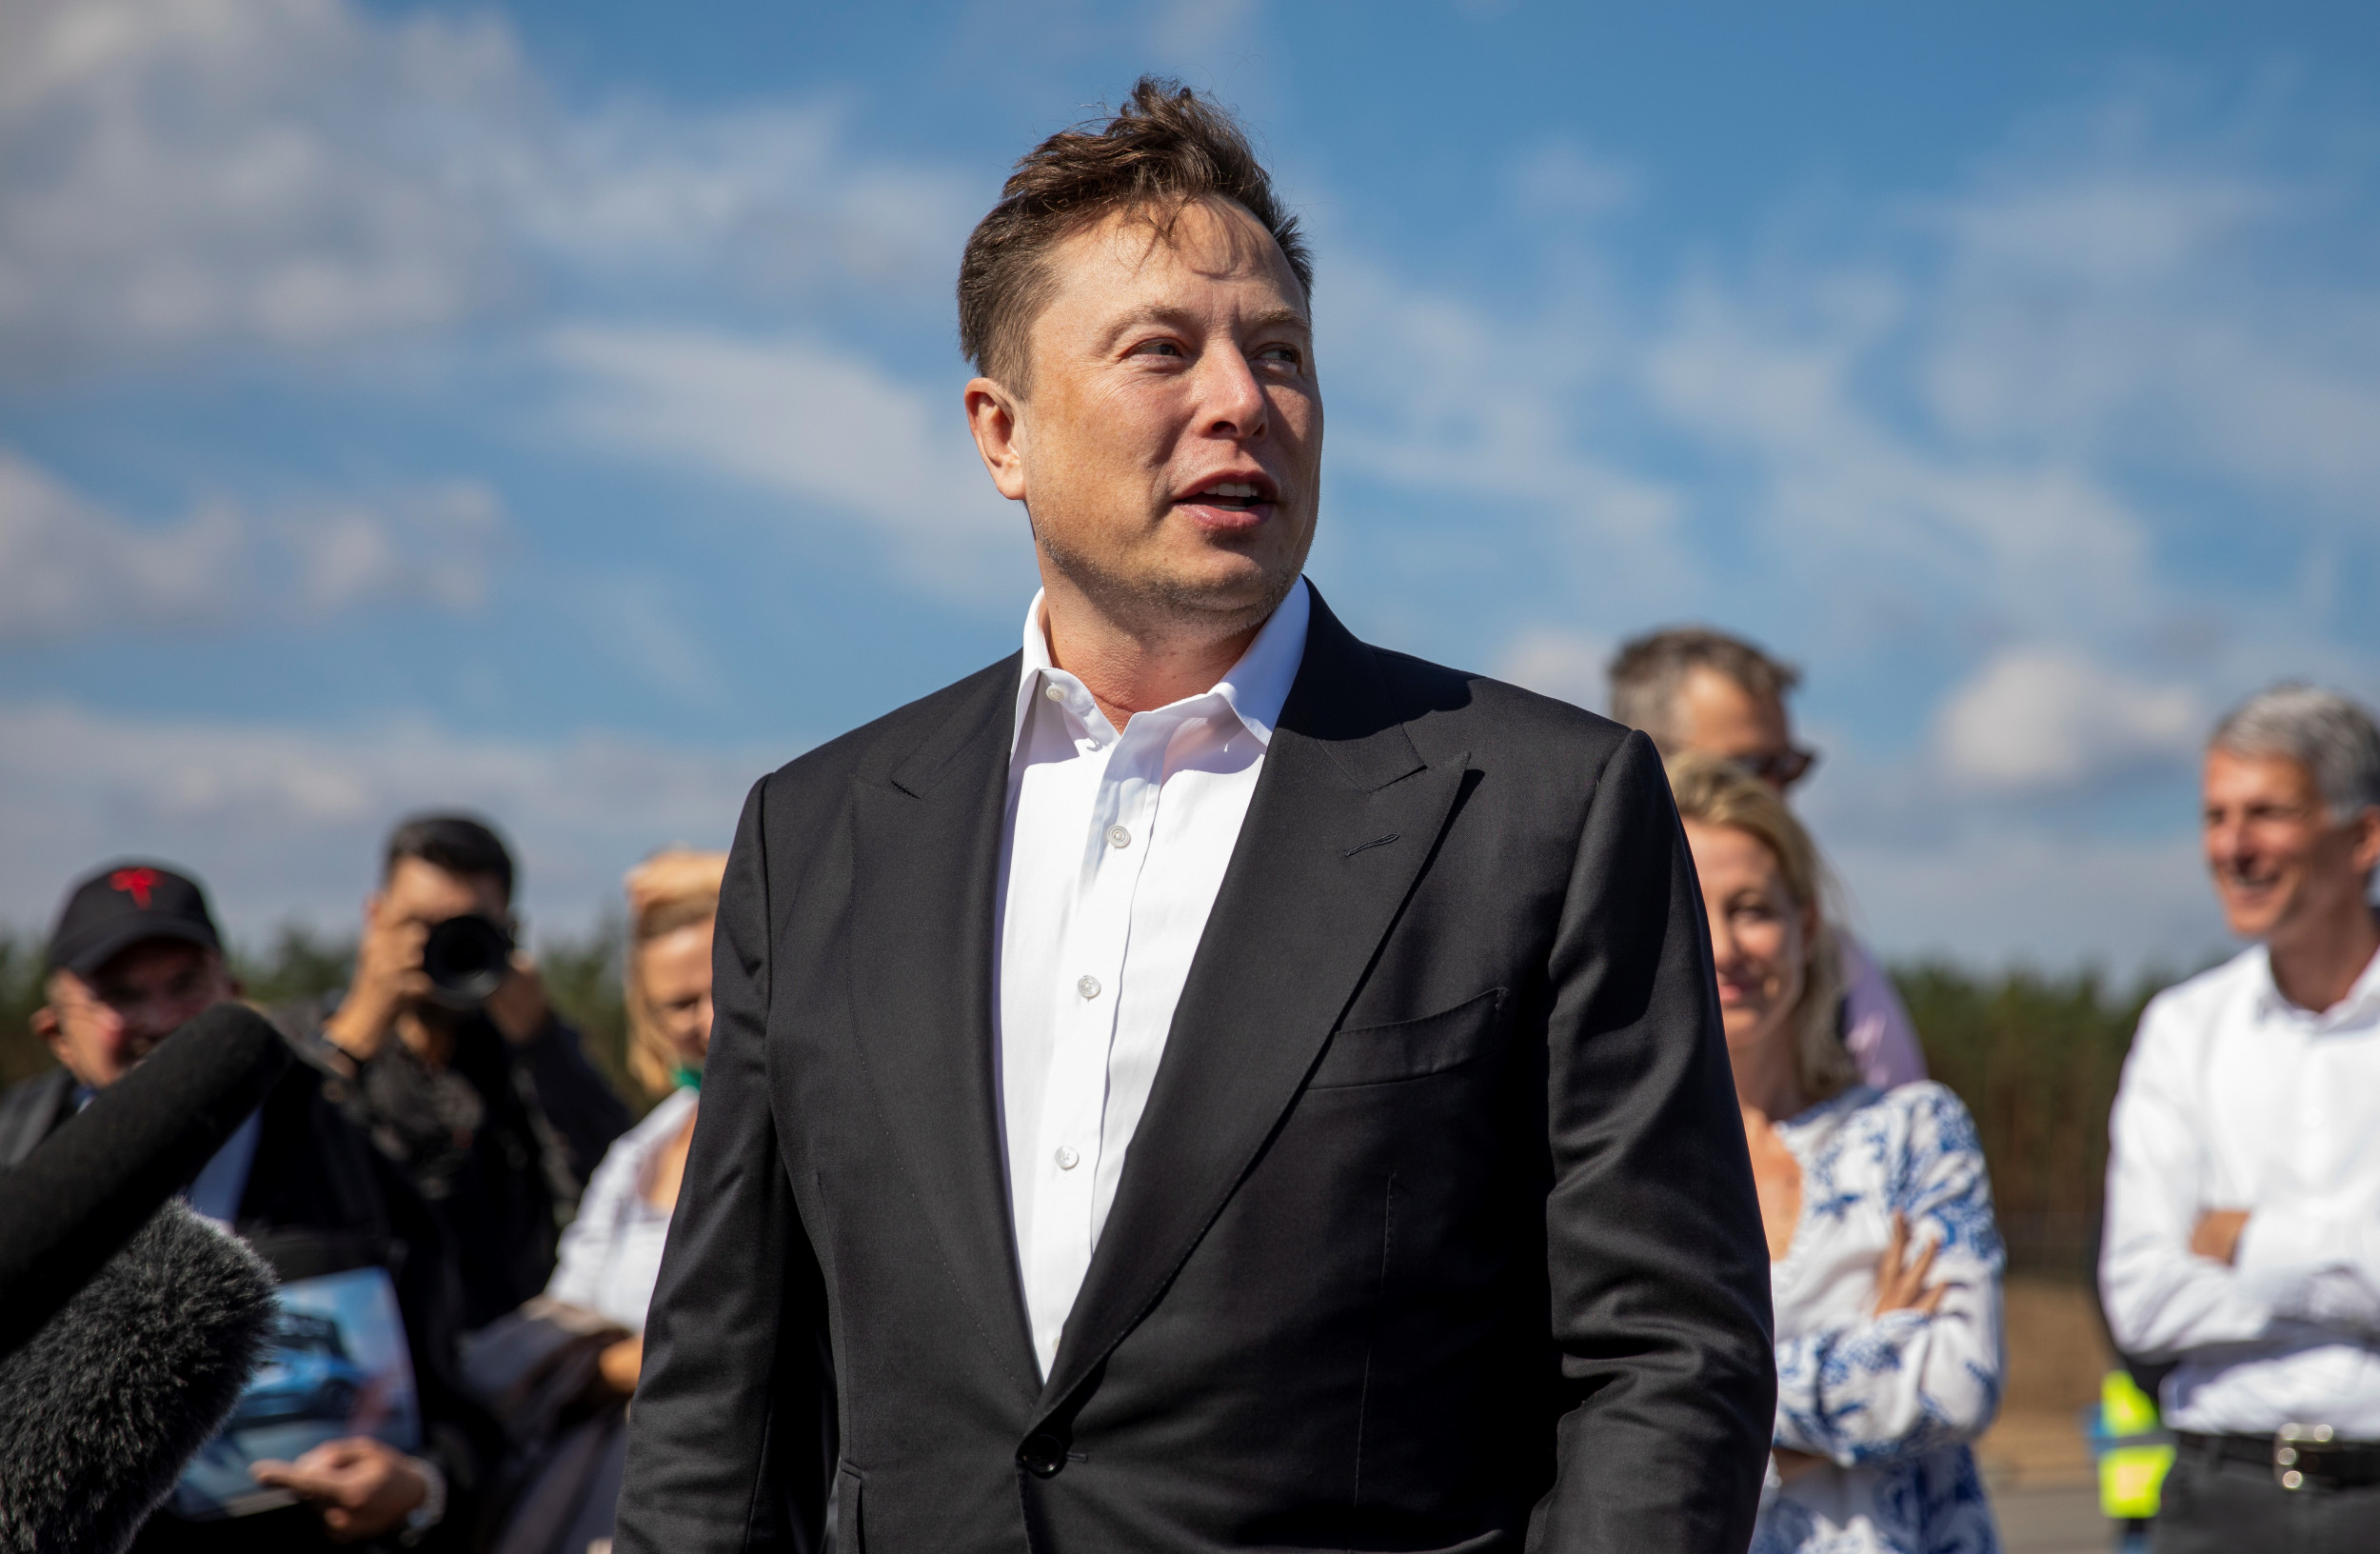 Elon Musk What Elon Musk's New Biographer Walter Isaacson Has Said About the Tesla and SpaceX CEO thumbnail